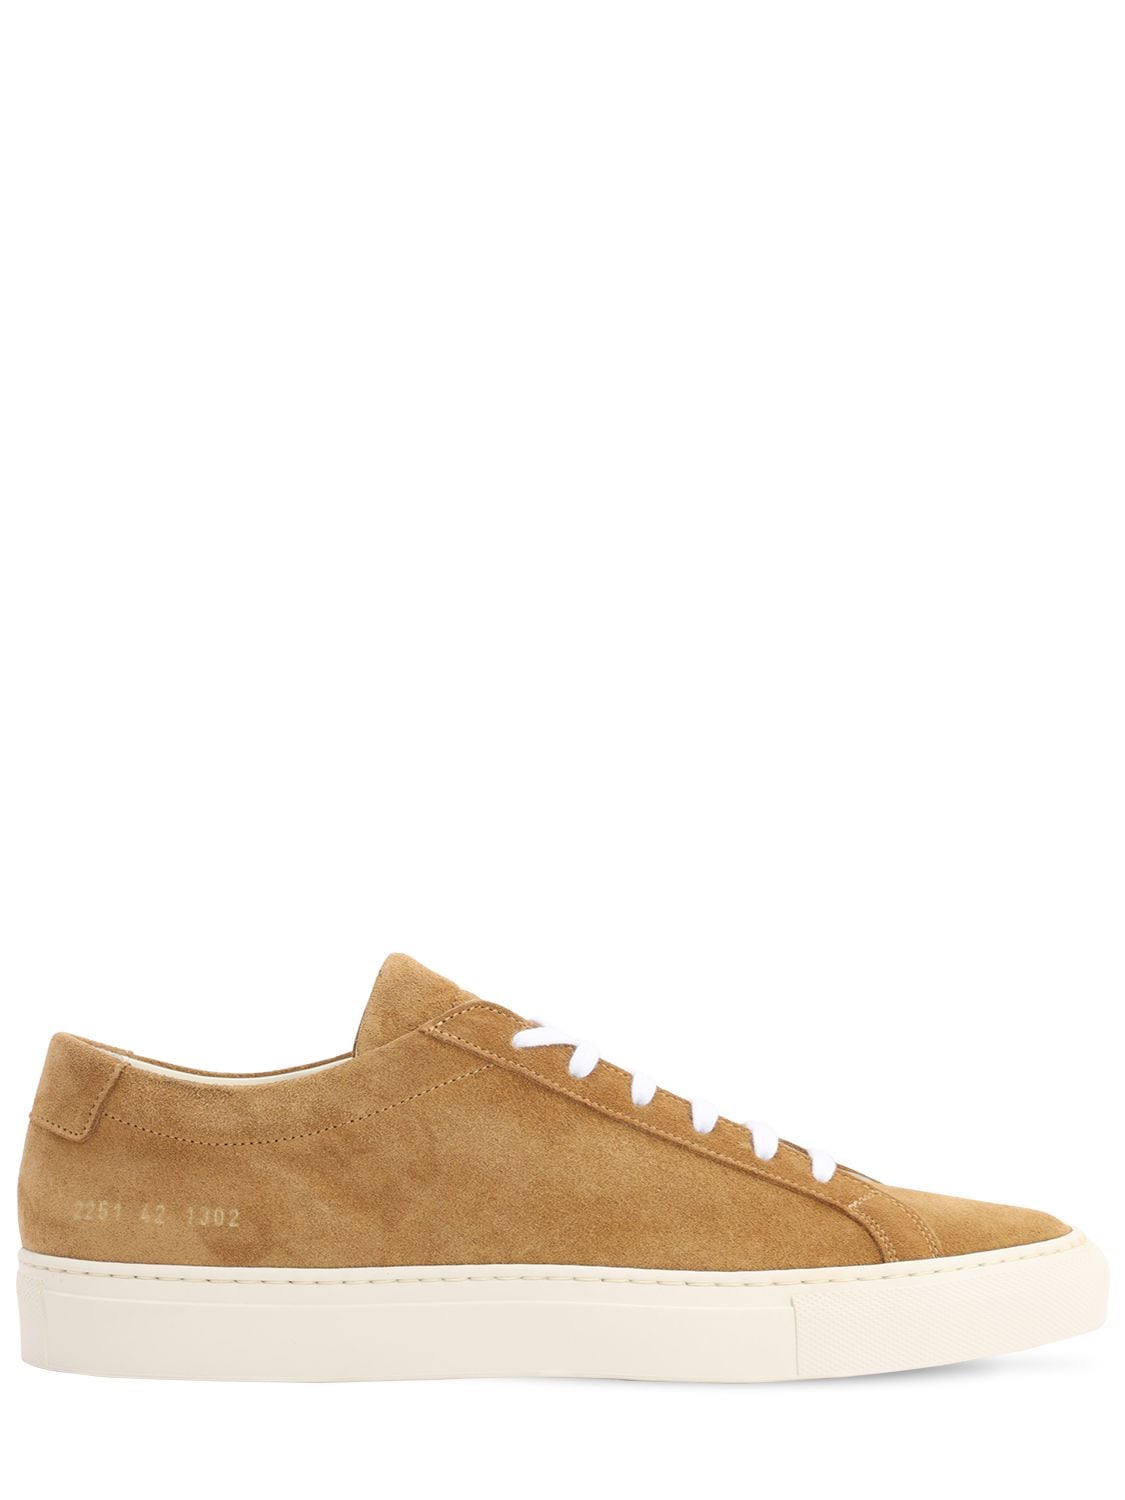 common projects original achilles suede sneakers